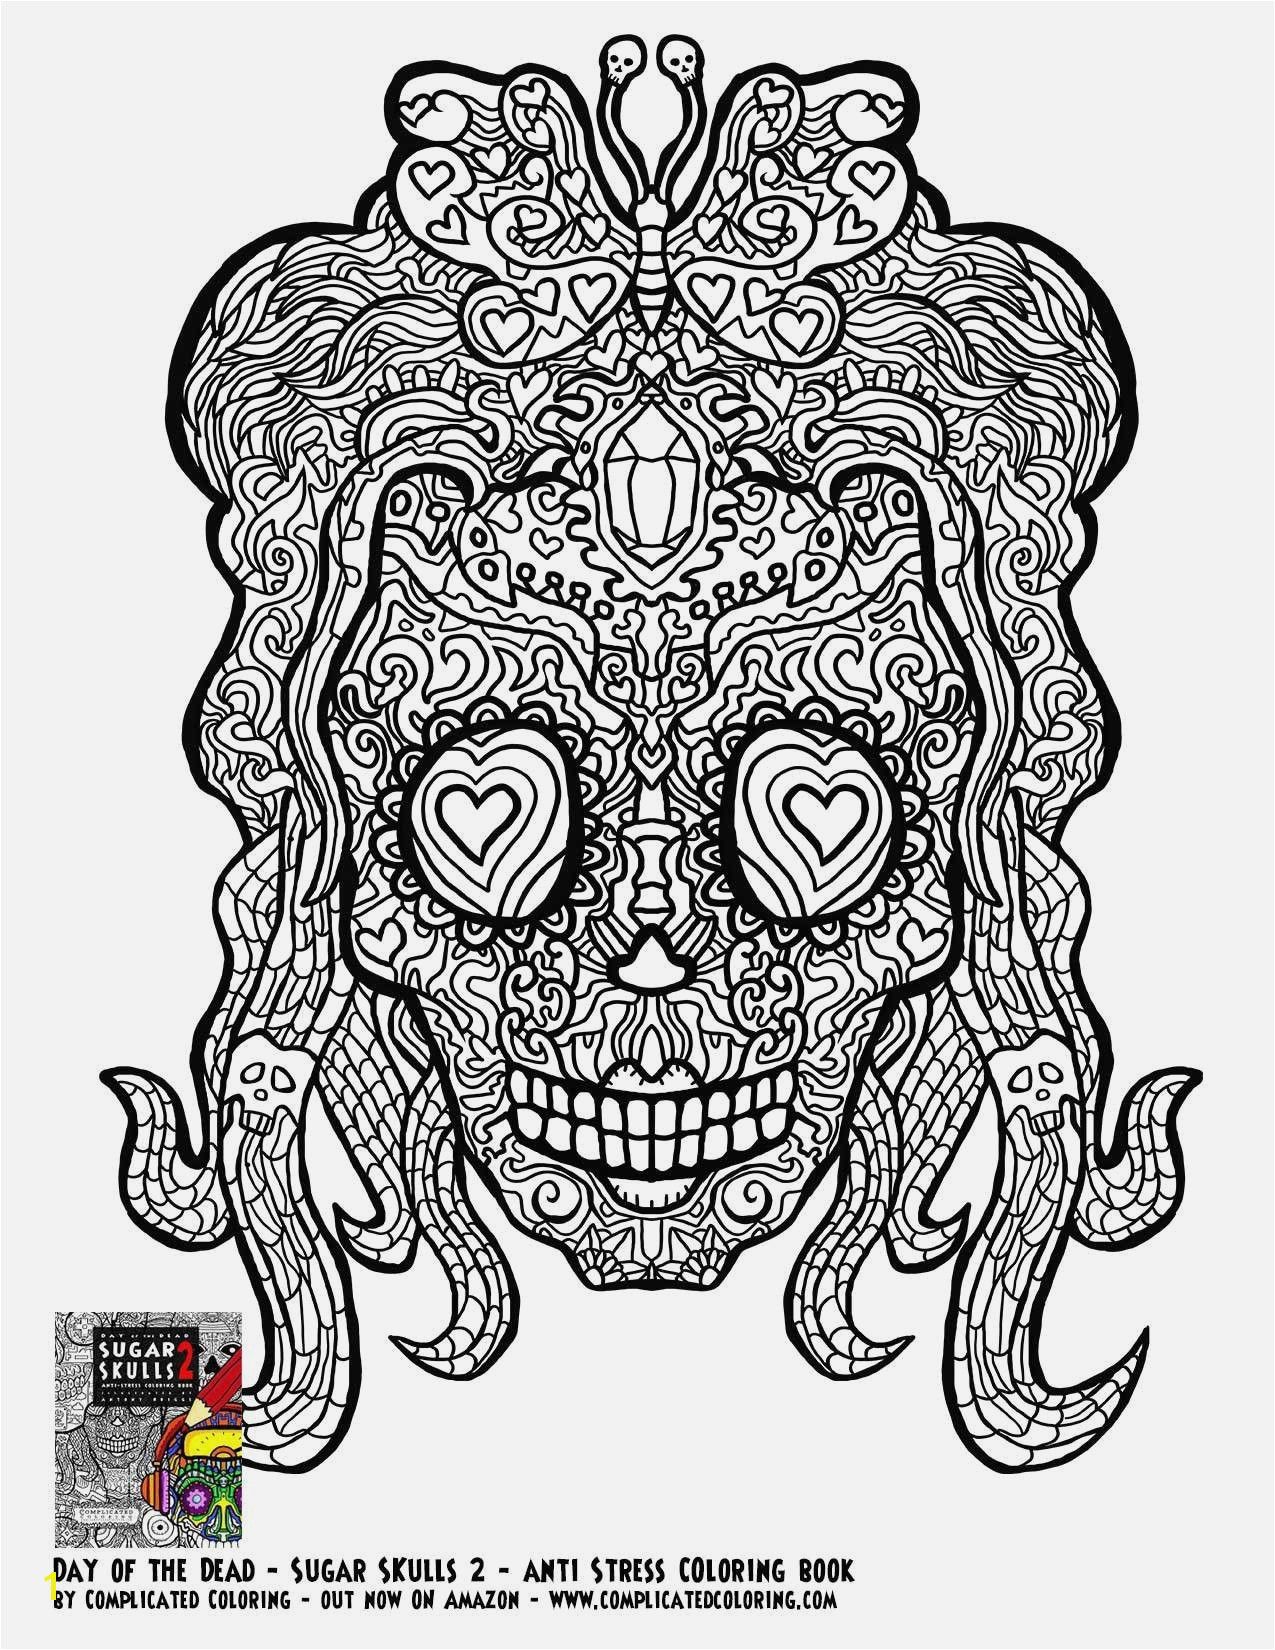 Free Flower Coloring Pages the Best Ever Free Adult Coloring Pages Lovely Vases Flowers In Vase